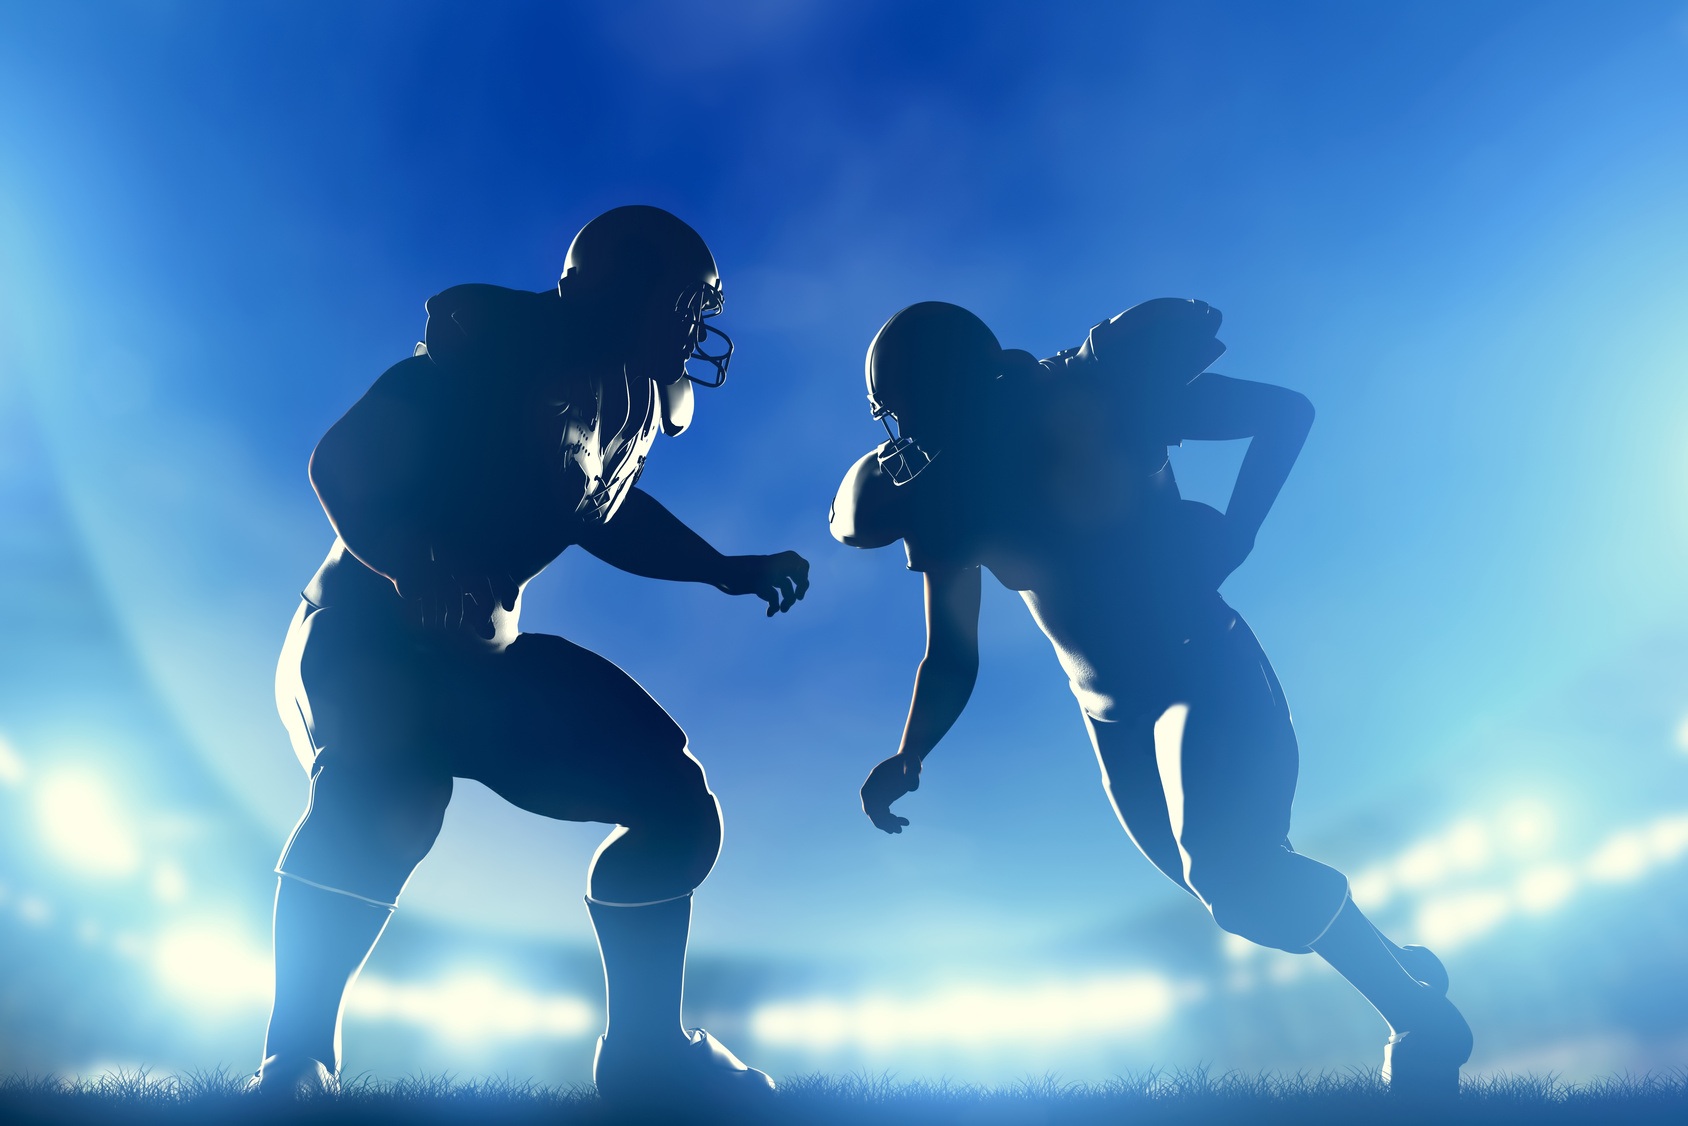 Football Injury? Sport Pain? Treatment for Athletic Injury? Your Best Pain Management Orthopedic / Geriatric / Sport Rehabilitation Therapists (PT) are here to help you in Columbia, Howard County, MD!